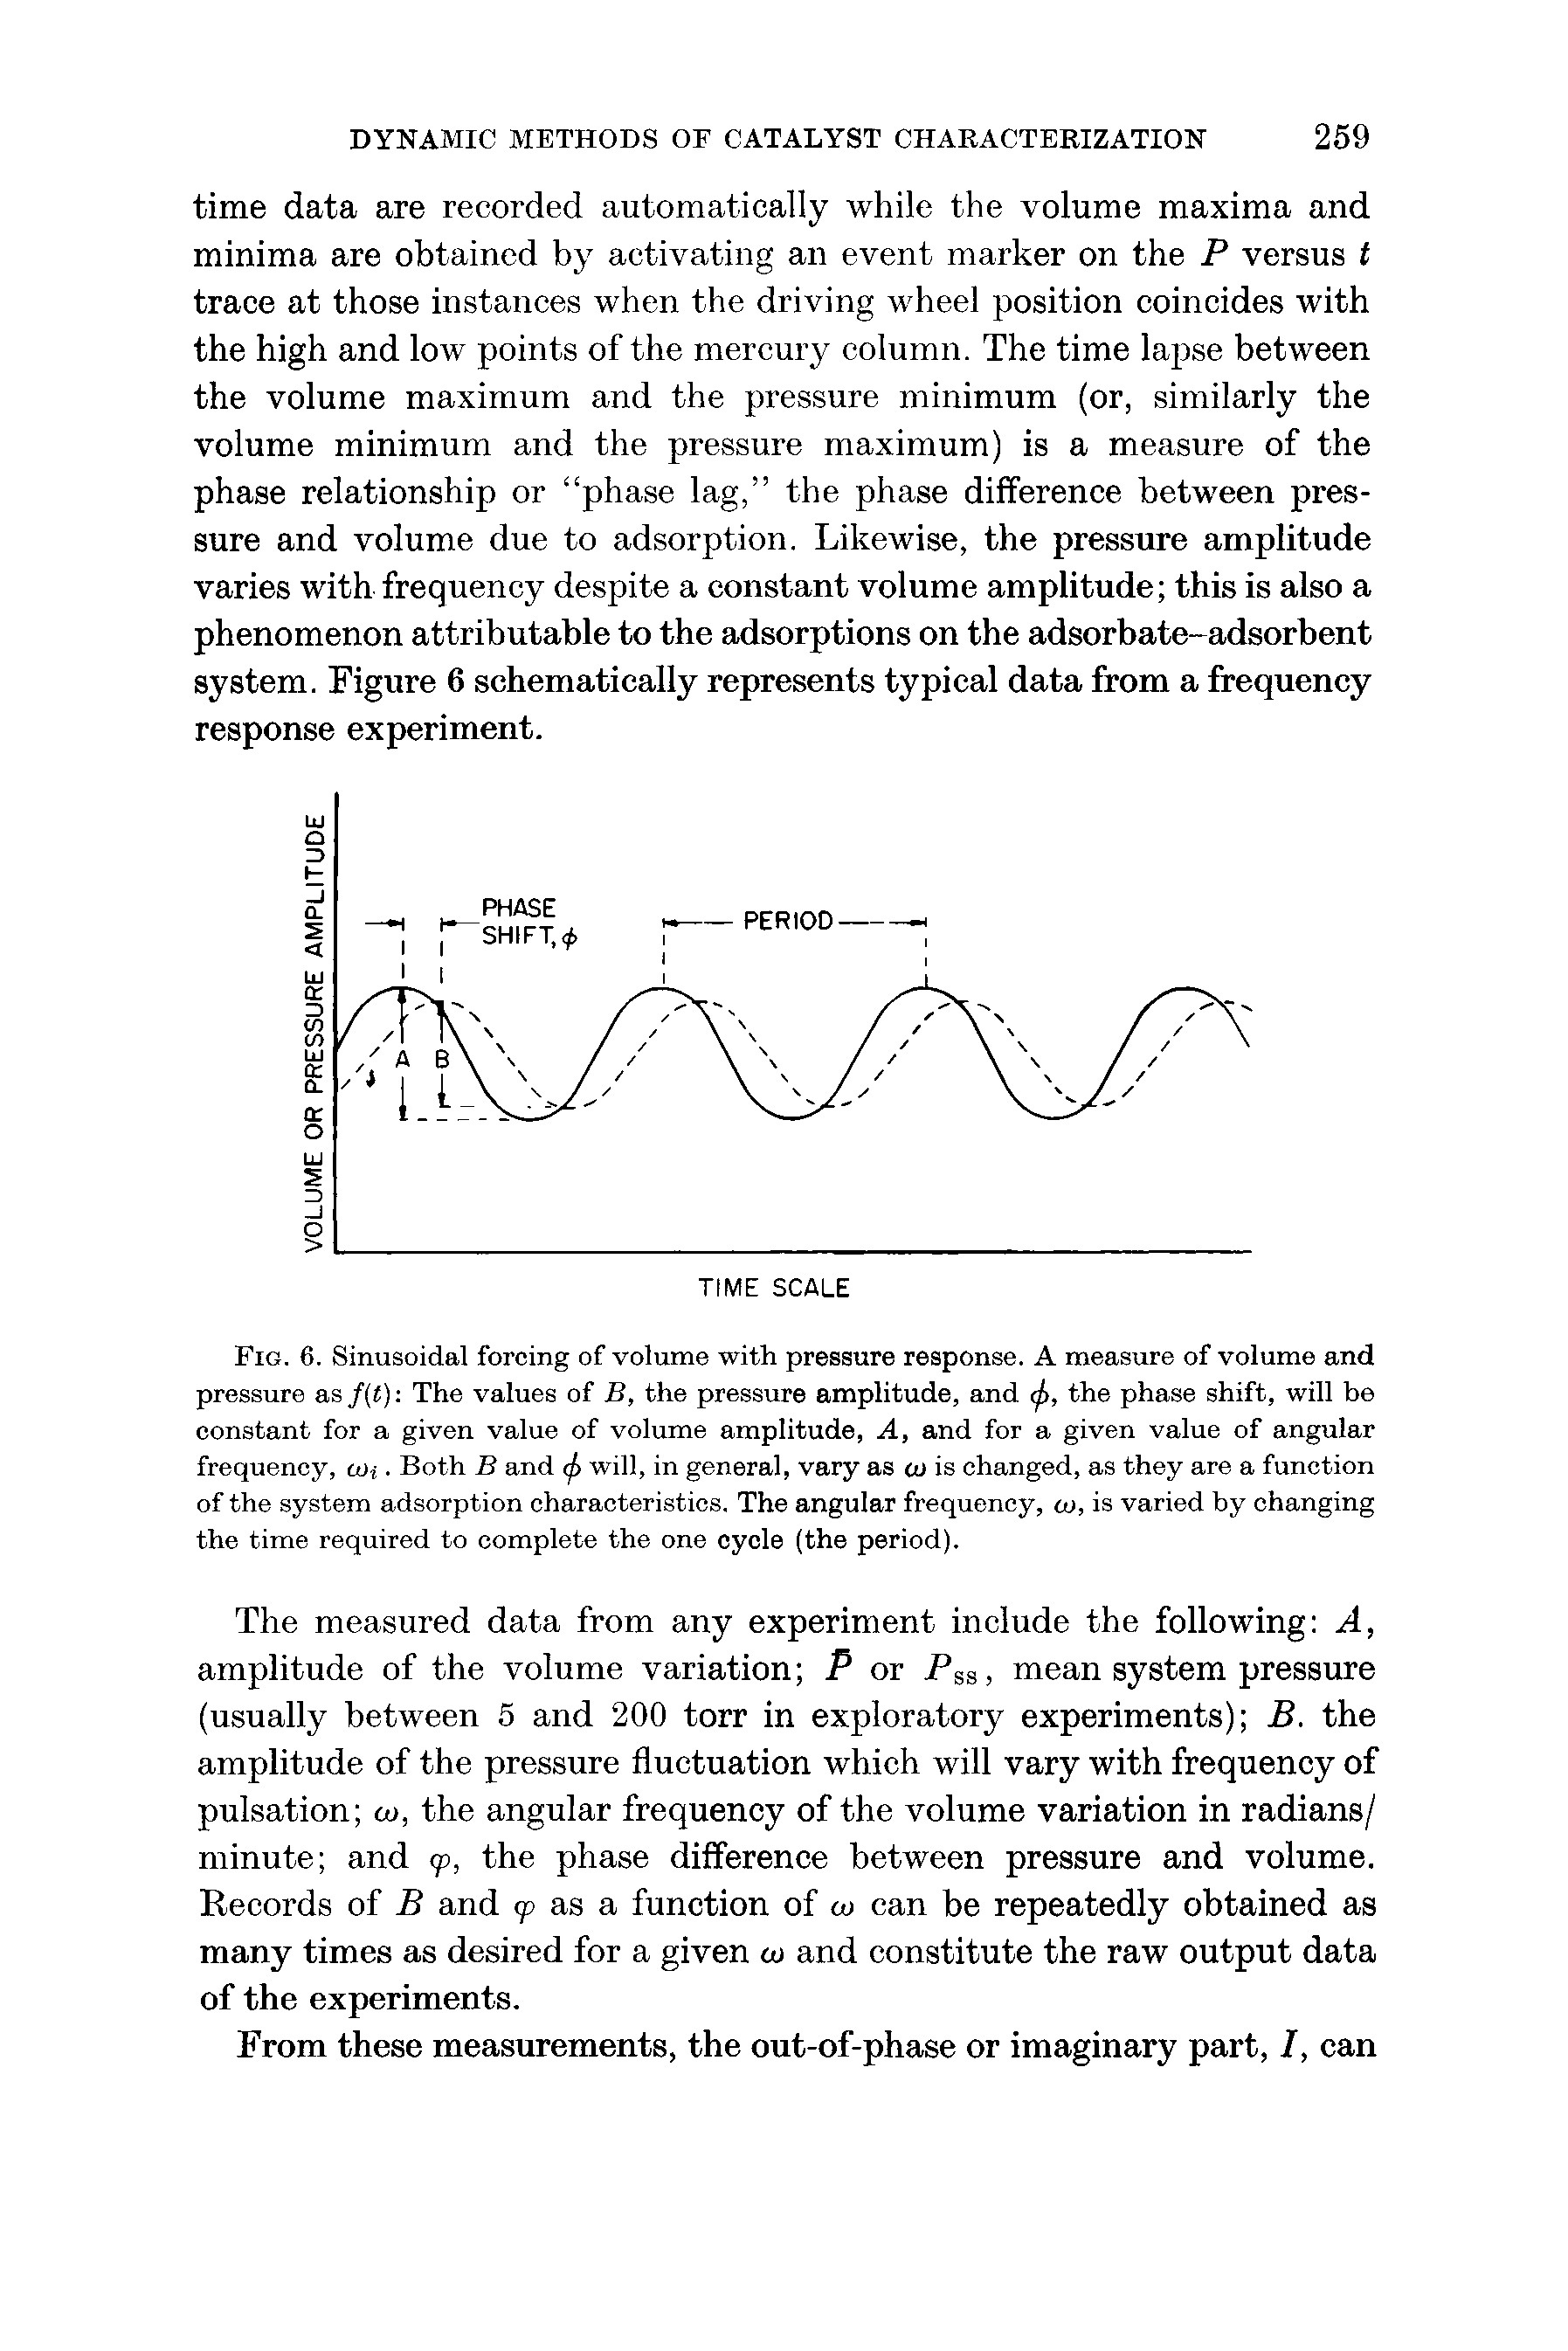 Fig. 6. Sinusoidal forcing of volume with pressure response. A measure of volume and pressure as f(t)i The values of B, the pressure amplitude, and tj), the phase shift, will be constant for a given value of volume amplitude, A, and for a given value of angular frequency, tOi. Both B and (j> will, in general, vary as cu is changed, as they are a function of the system adsorption characteristics. The angular frequency, o), is varied by changing the time required to complete the one cycle (the period).